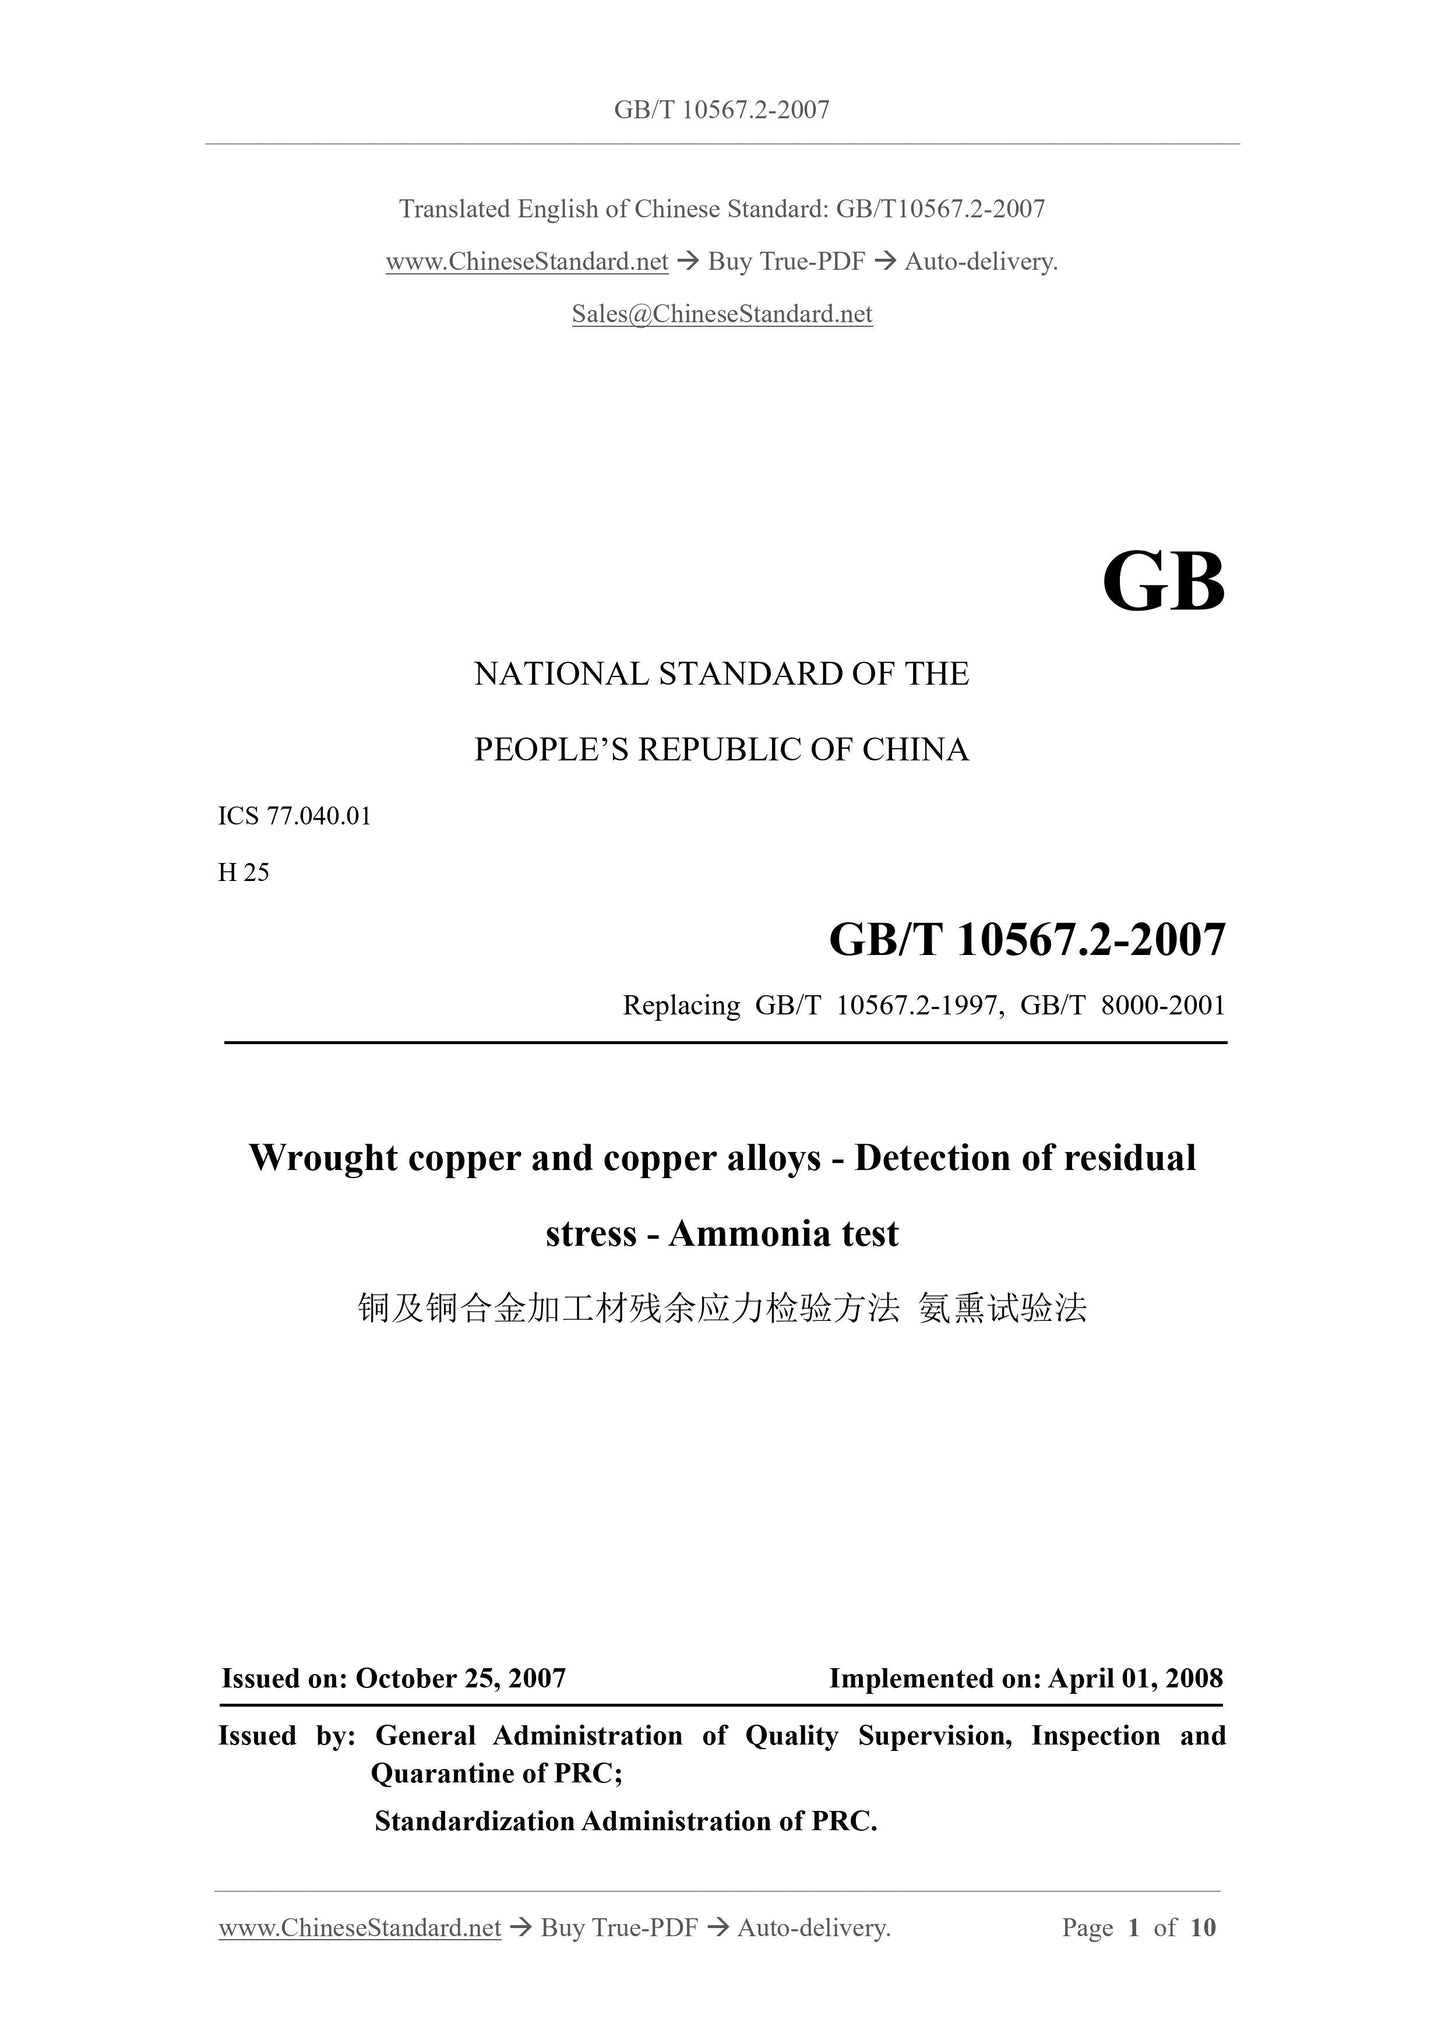 GB/T 10567.2-2007 Page 1